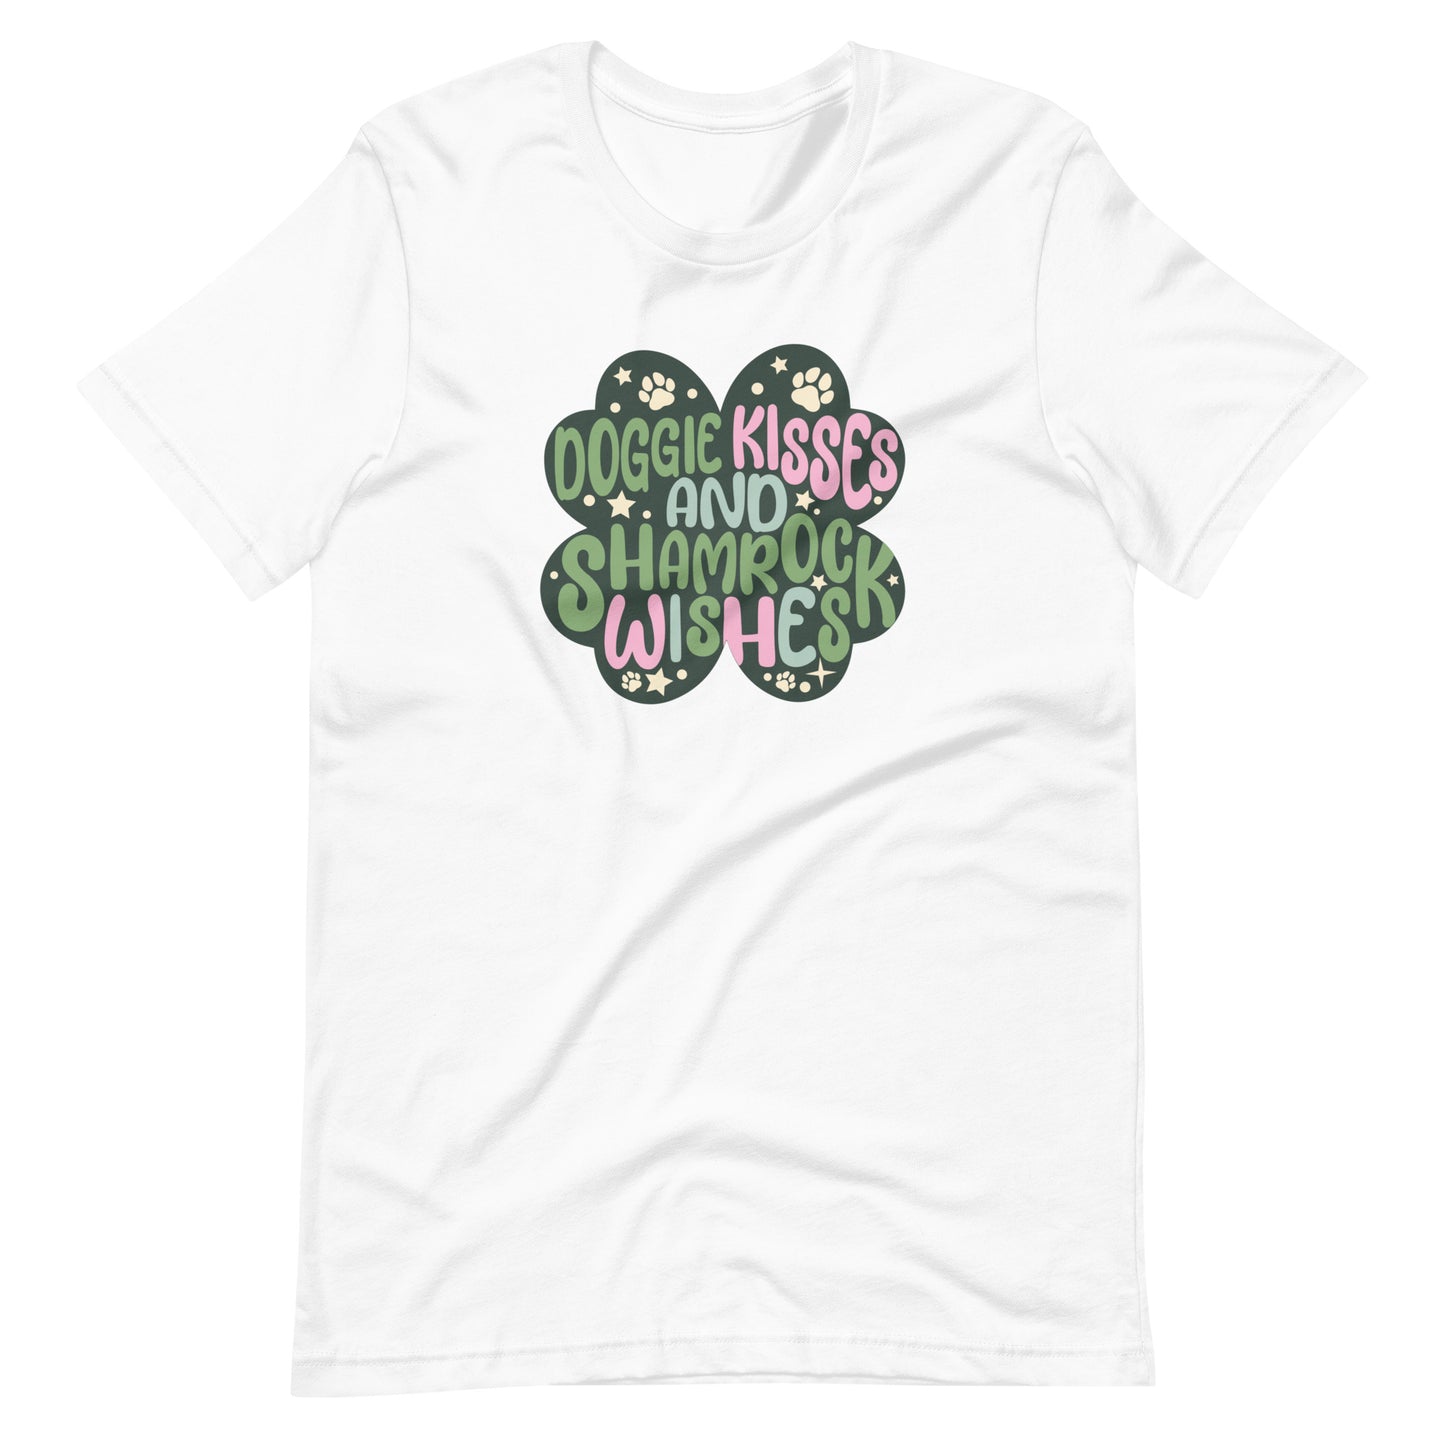 Doggie Kisses and Shamrock Wishes T-Shirt